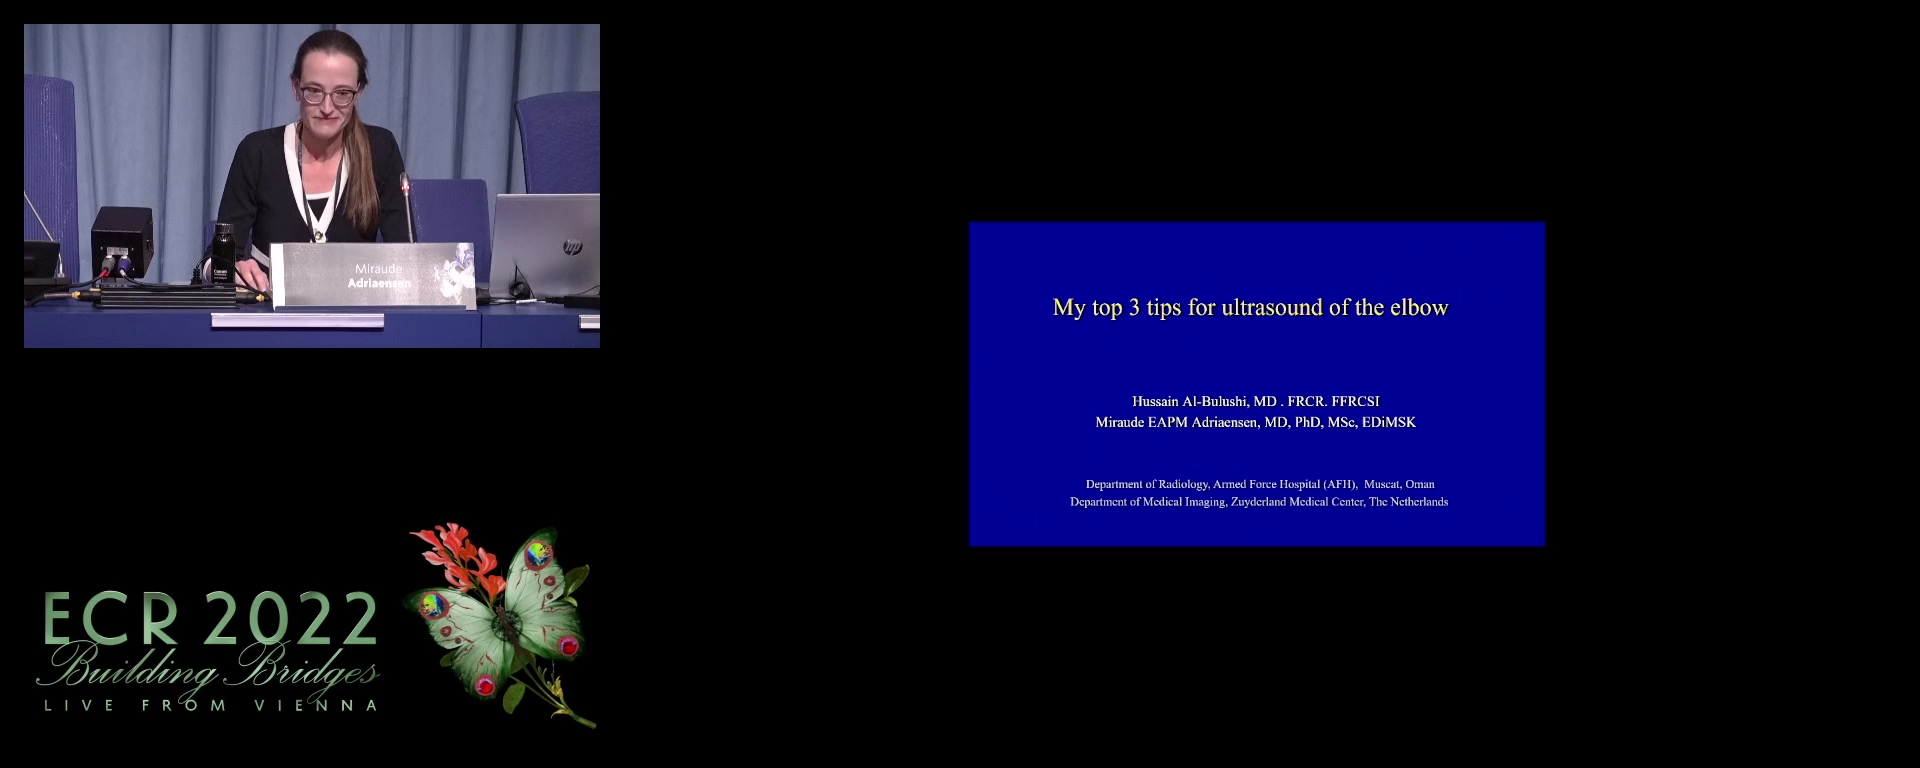 My top three tips for ultrasound of the elbow and forearm - Hussain Al Bulushi, Muscat / OM